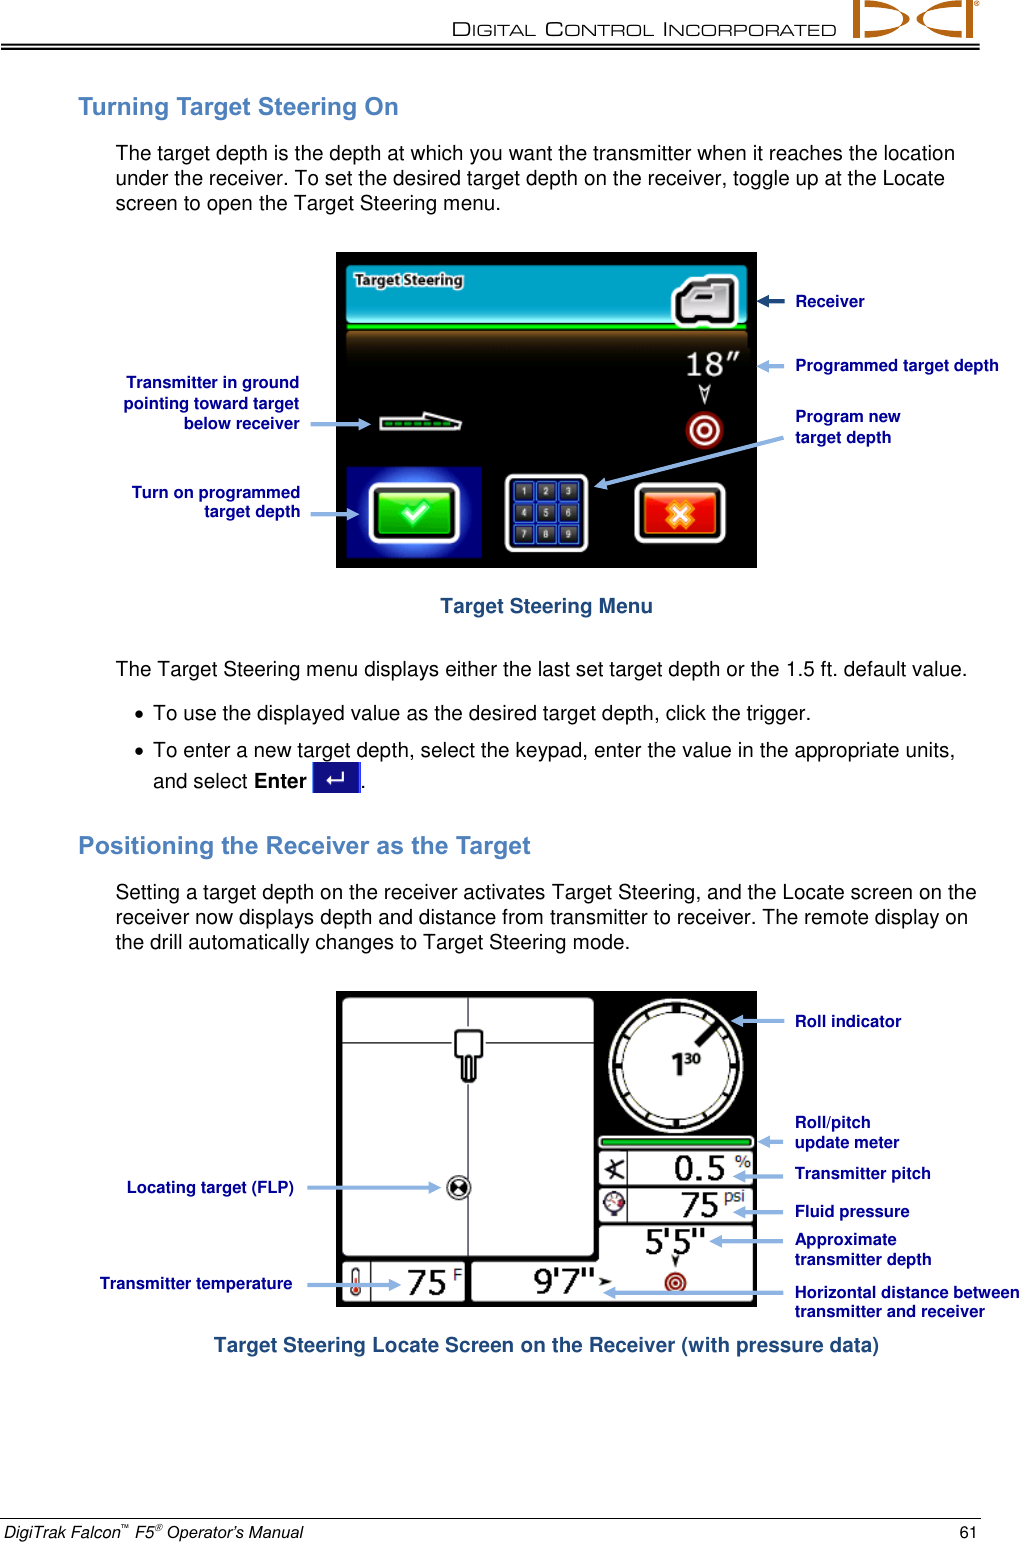 DIGITAL  CONTROL  INCORPORATED  DigiTrak Falcon™ F5 Operator’s Manual 61 Turning Target Steering On The target depth is the depth at which you want the transmitter when it reaches the location under the receiver. To set the desired target depth on the receiver, toggle up at the Locate screen to open the Target Steering menu.  Target Steering Menu The Target Steering menu displays either the last set target depth or the 1.5 ft. default value.   To use the displayed value as the desired target depth, click the trigger.   To enter a new target depth, select the keypad, enter the value in the appropriate units, and select Enter  . Positioning the Receiver as the Target Setting a target depth on the receiver activates Target Steering, and the Locate screen on the receiver now displays depth and distance from transmitter to receiver. The remote display on the drill automatically changes to Target Steering mode.  Target Steering Locate Screen on the Receiver (with pressure data) Programmed target depth Transmitter in ground pointing toward target below receiver Turn on programmed target depth Program new target depth   Receiver Transmitter temperature Approximate transmitter depth Transmitter pitch Locating target (FLP) Roll/pitch update meter Roll indicator Horizontal distance between transmitter and receiver Fluid pressure 